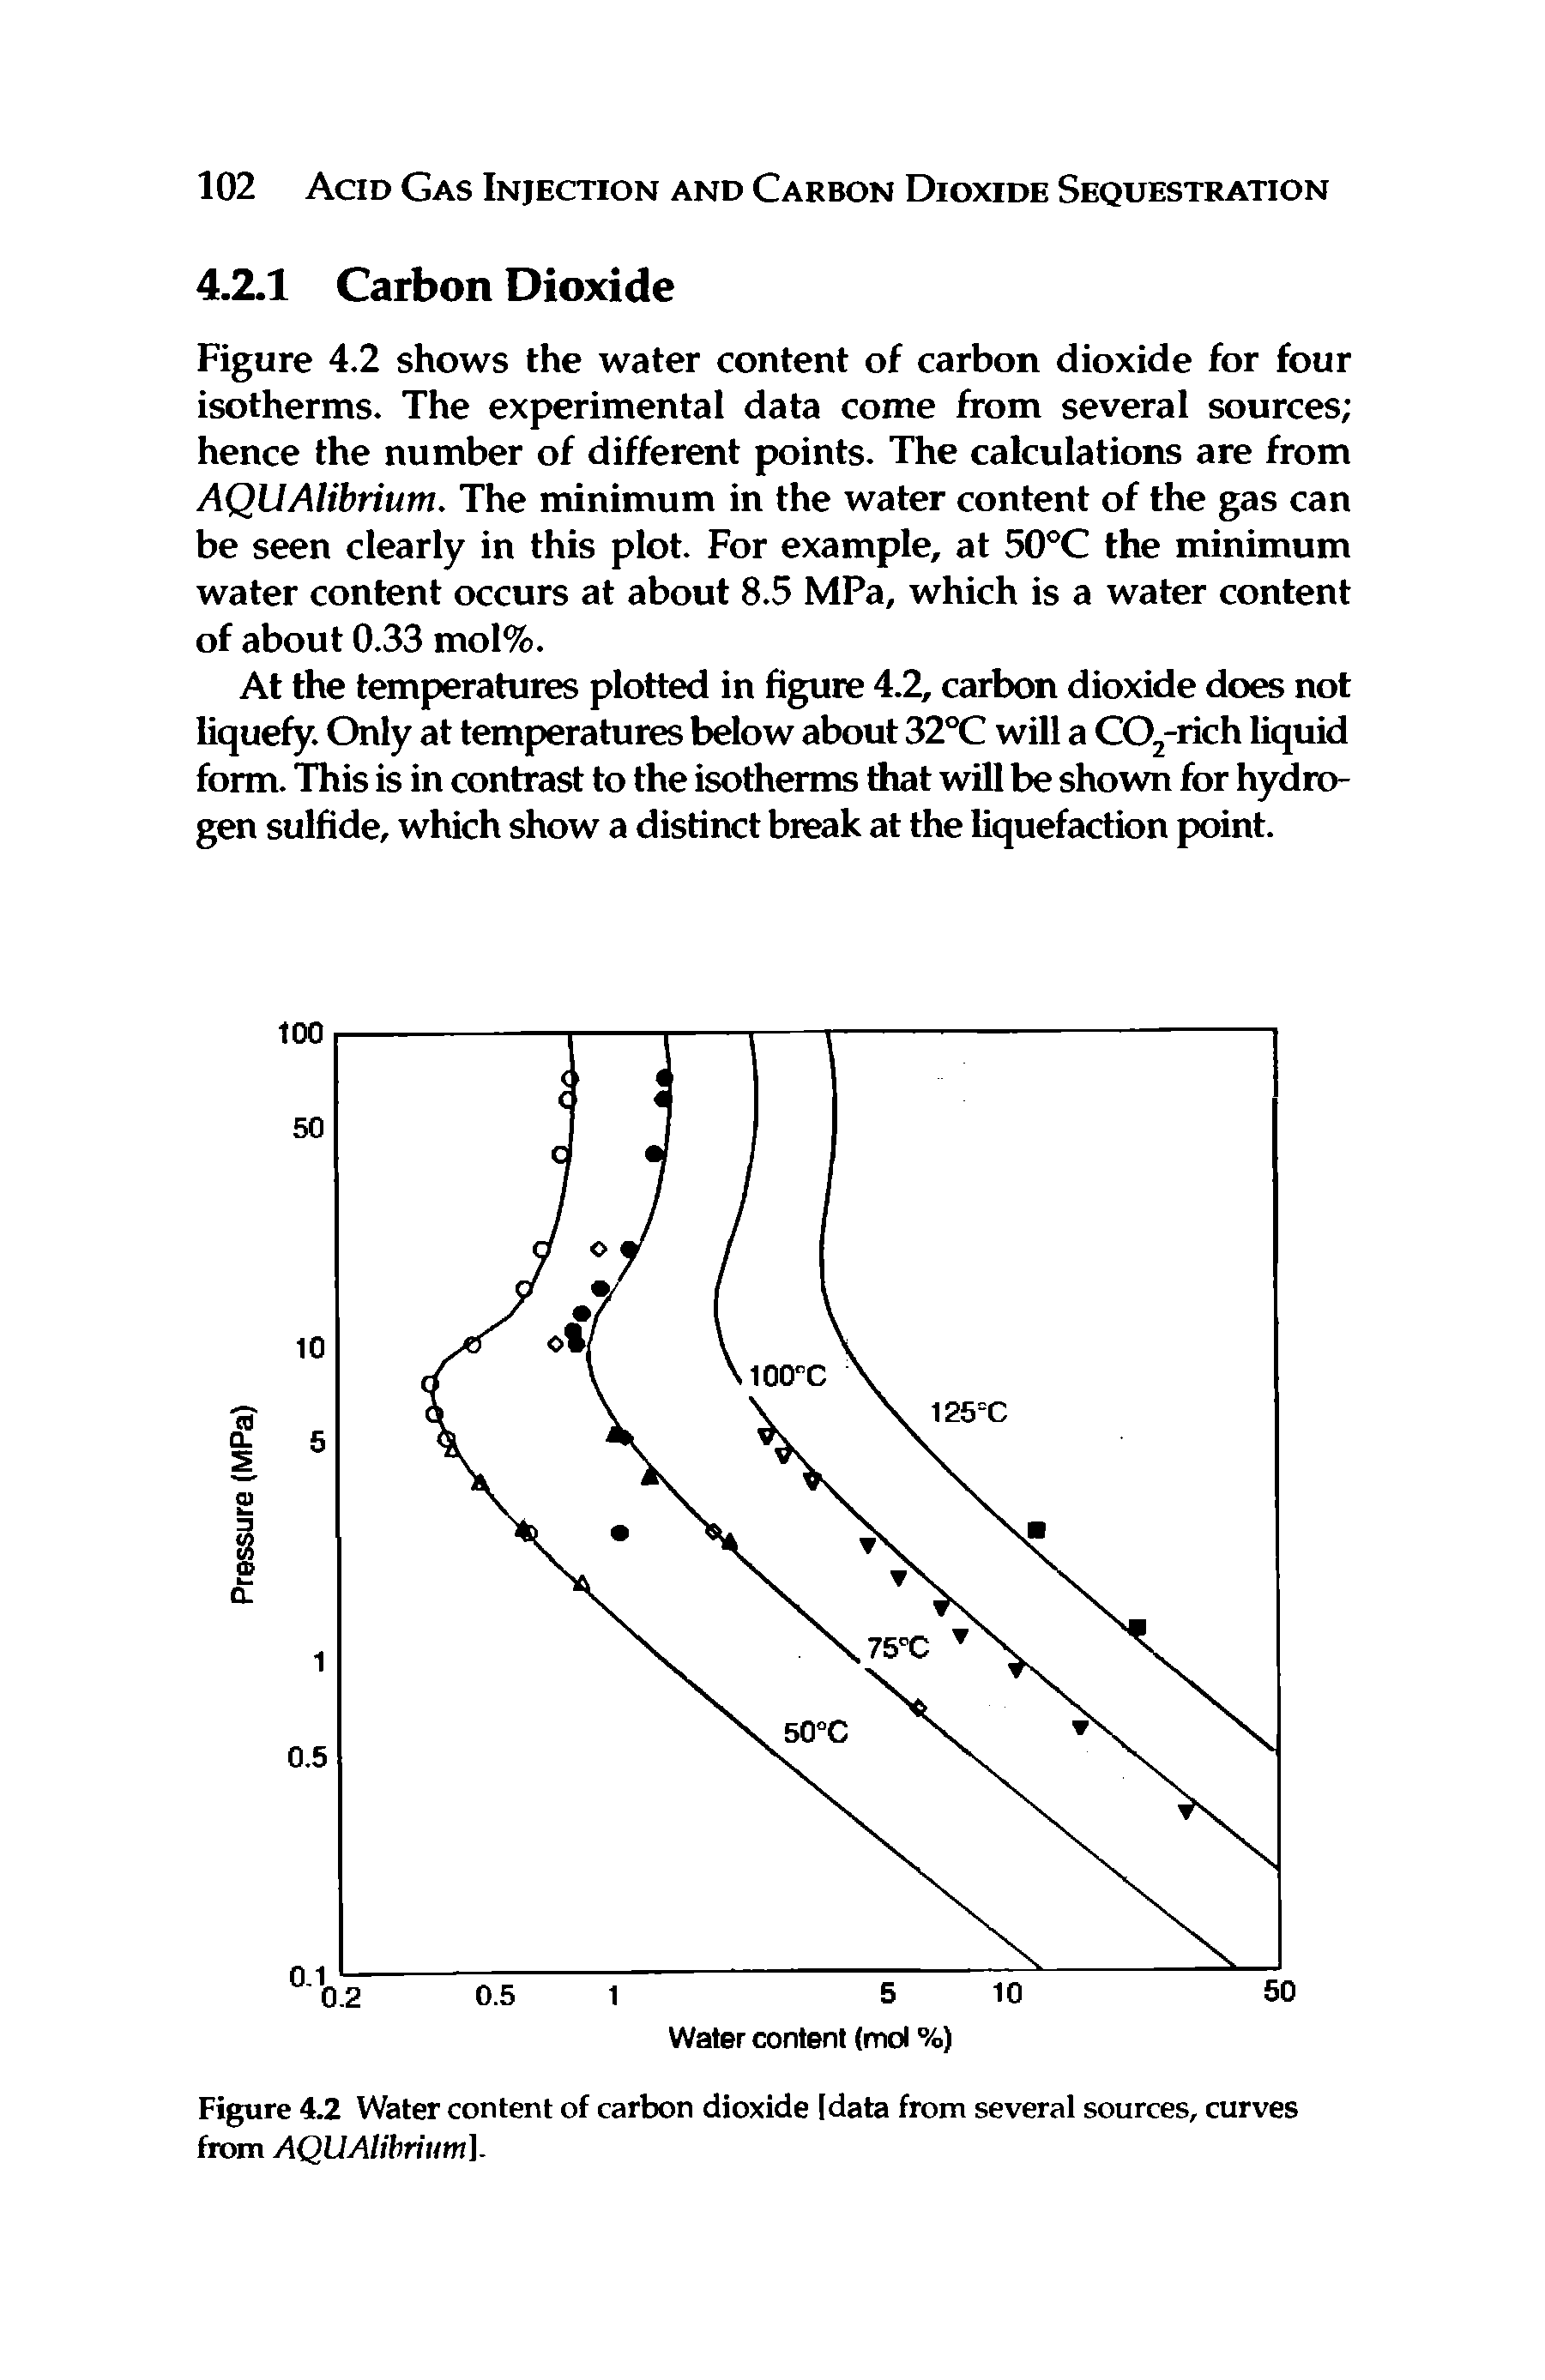 Figure 4.2 Water content of carbon dioxide [data from several sources, curves from AQUAlibrium].